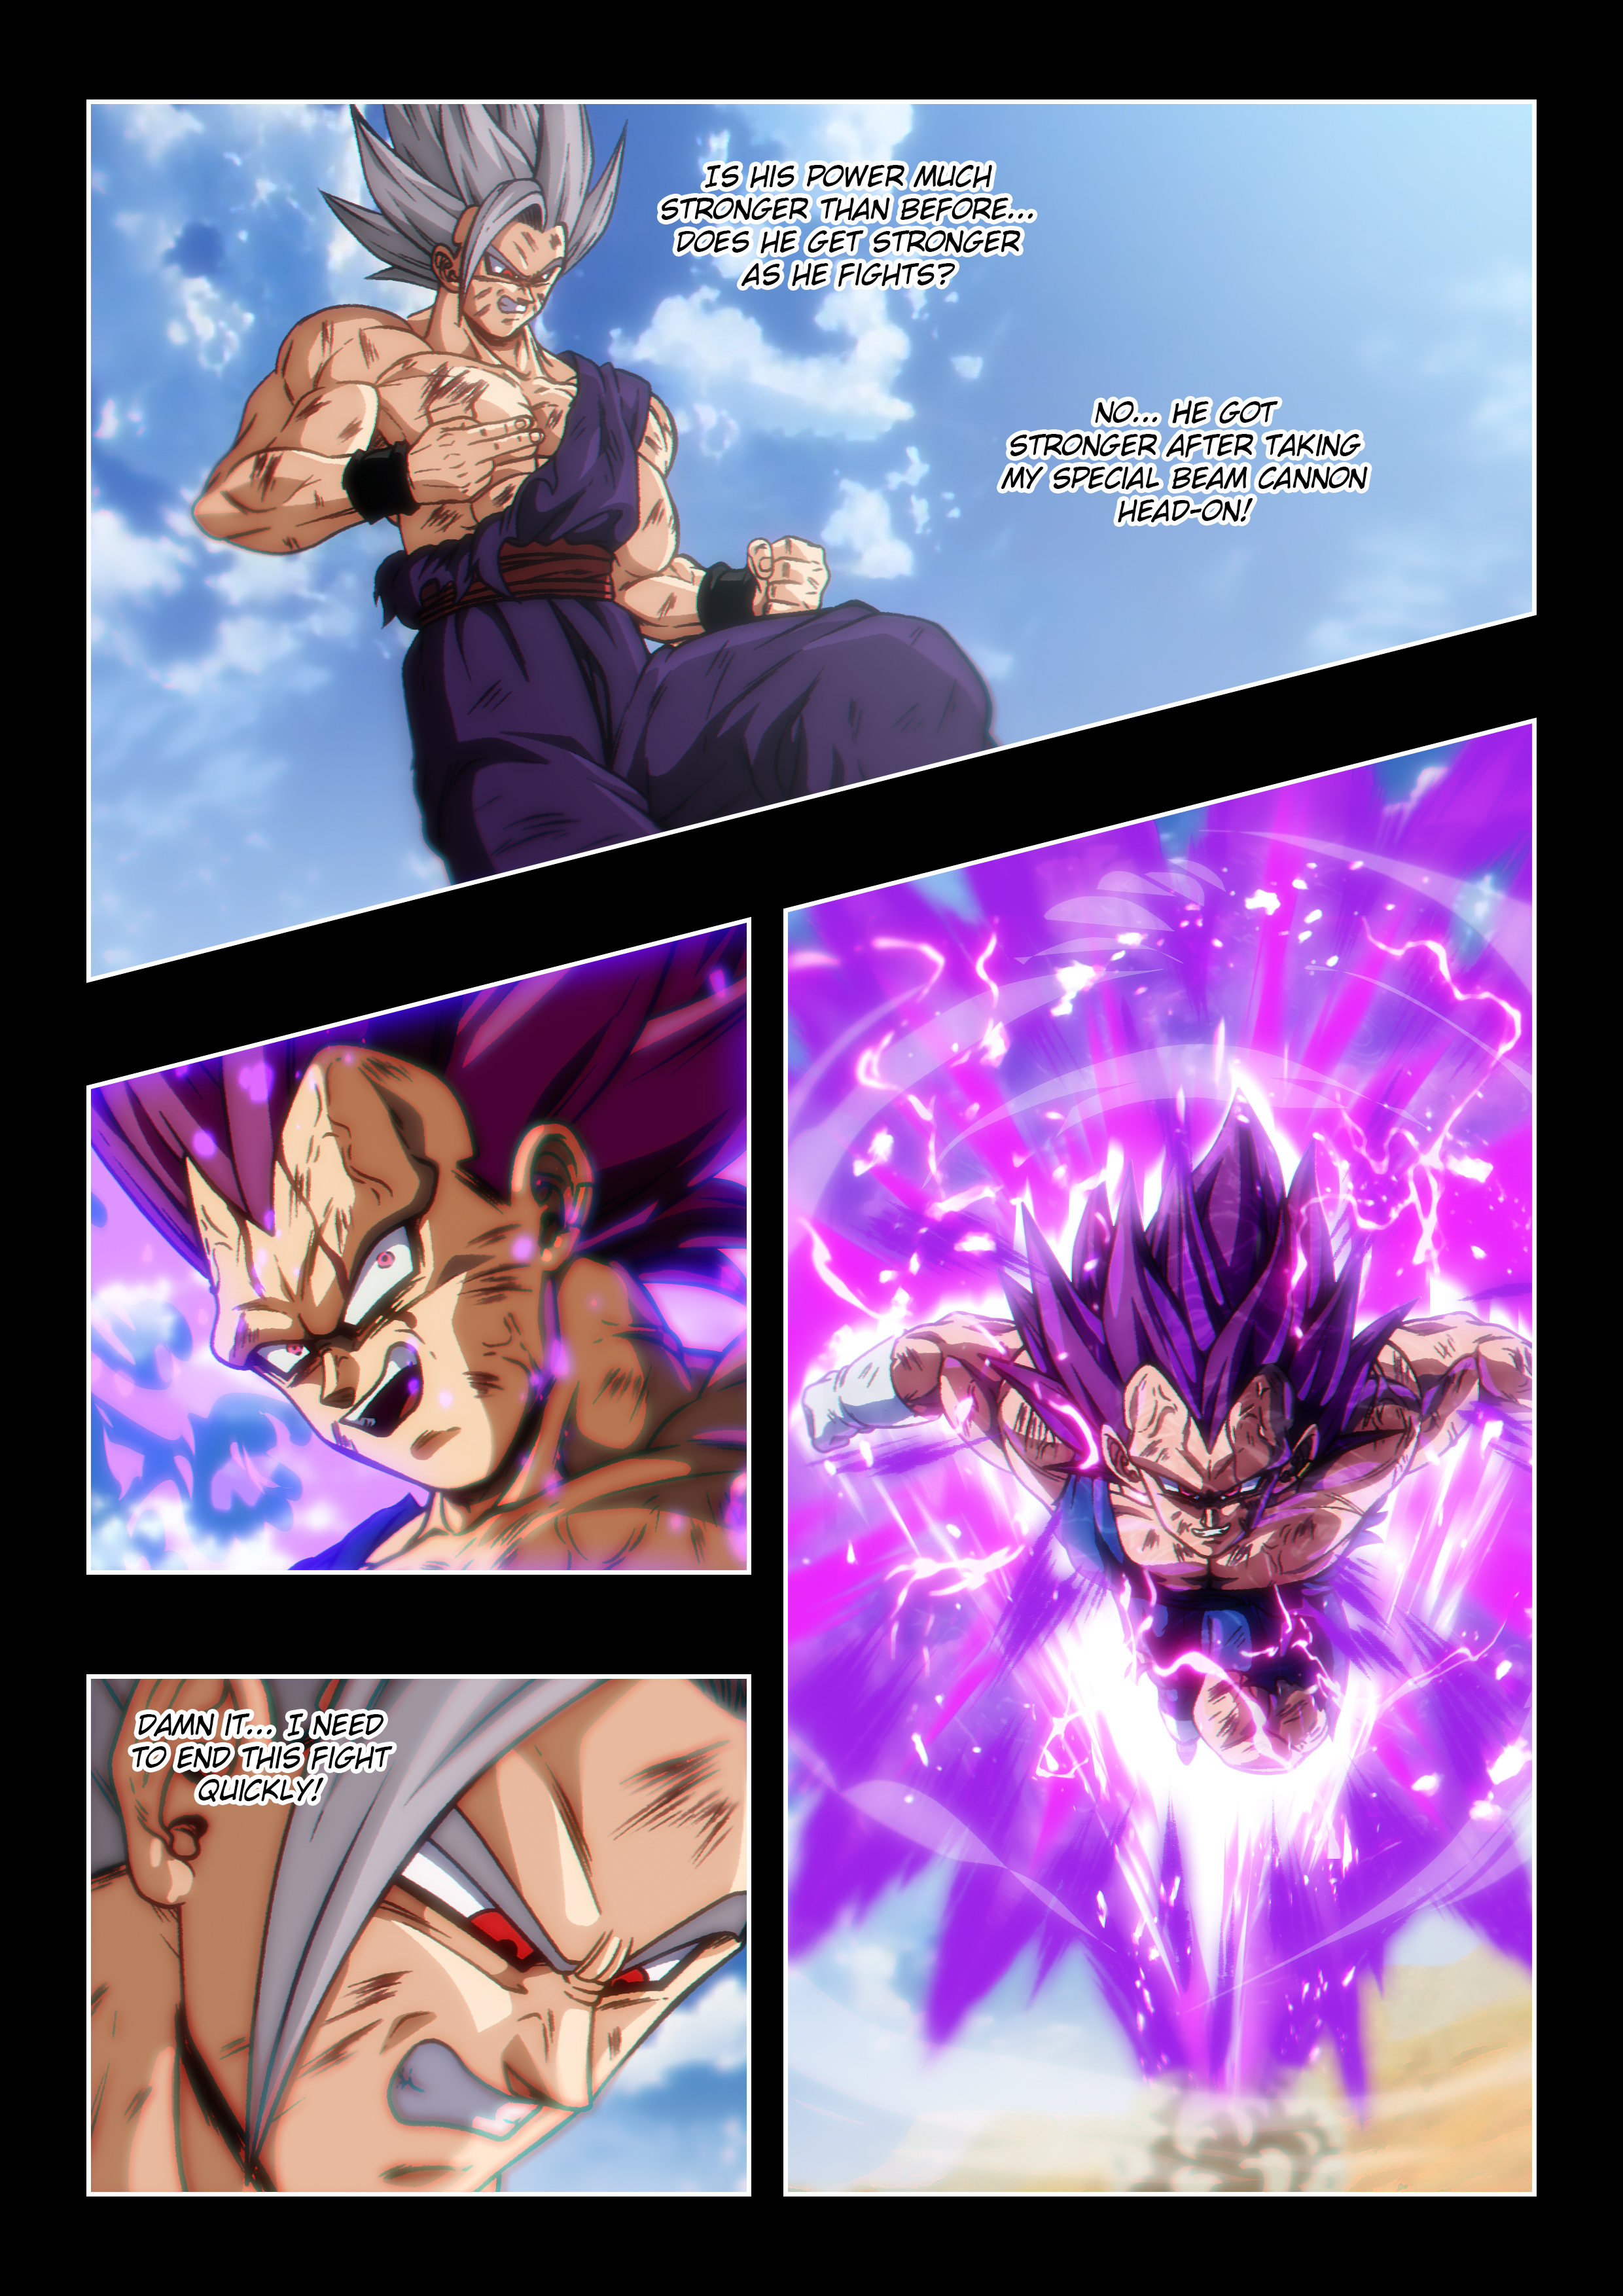 Dragon ball The Pride Of The Beast parte 2 F2ItTehWAAIgb4g?format=jpg&name=4096x4096